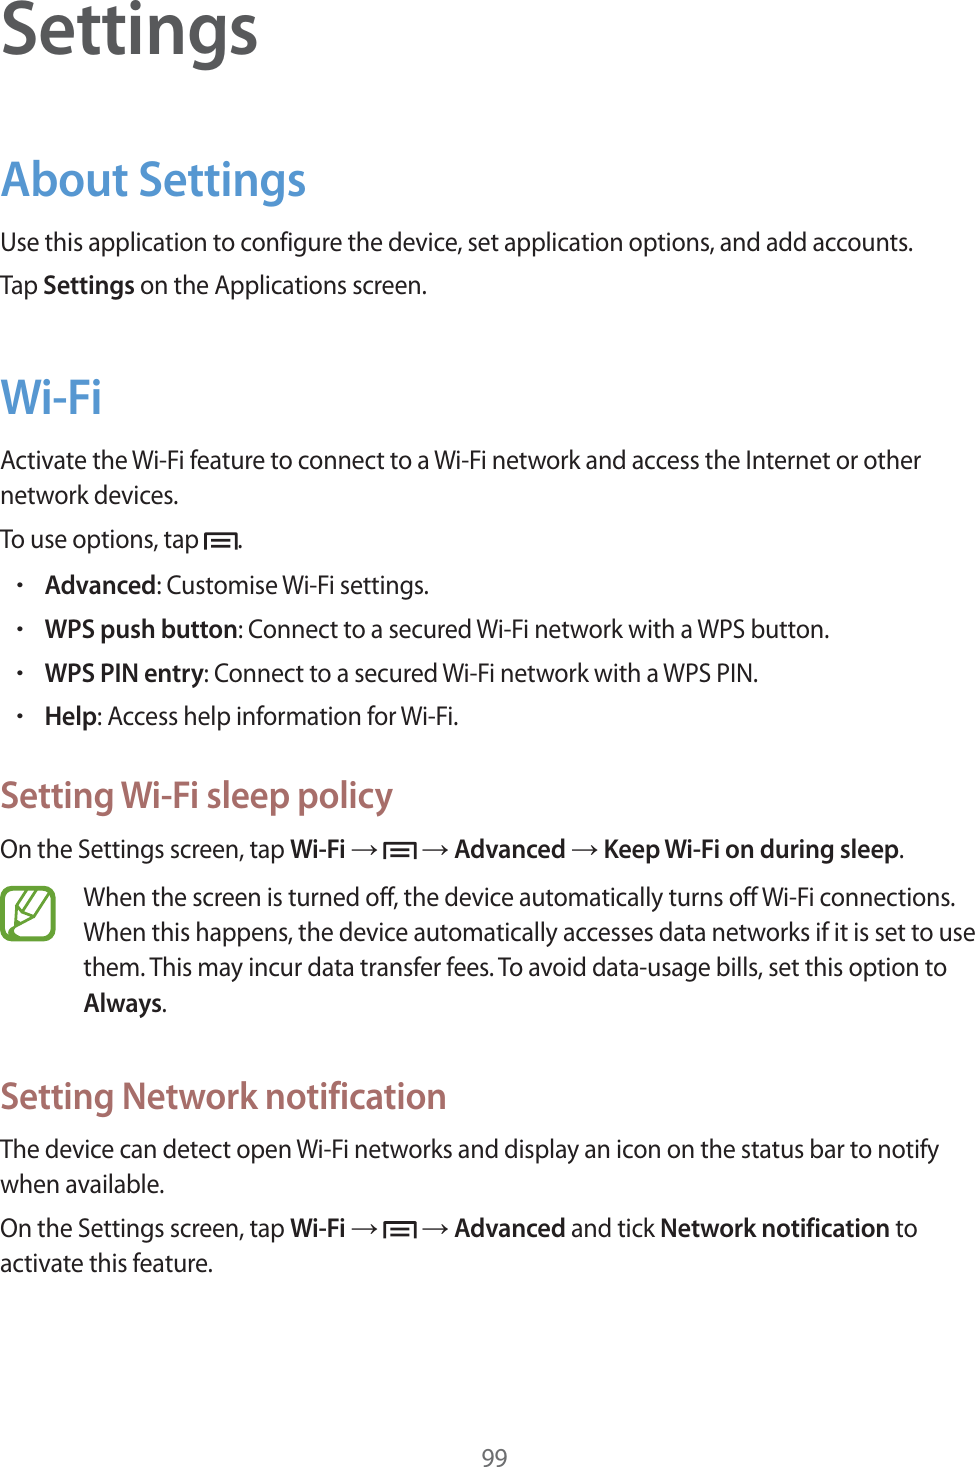 99SettingsAbout SettingsUse this application to configure the device, set application options, and add accounts.Tap Settings on the Applications screen.Wi-FiActivate the Wi-Fi feature to connect to a Wi-Fi network and access the Internet or other network devices.To use options, tap  .rAdvanced: Customise Wi-Fi settings.rWPS push button: Connect to a secured Wi-Fi network with a WPS button.rWPS PIN entry: Connect to a secured Wi-Fi network with a WPS PIN.rHelp: Access help information for Wi-Fi.Setting Wi-Fi sleep policyOn the Settings screen, tap Wi-Fi ĺ   ĺ Advanced ĺ Keep Wi-Fi on during sleep.When the screen is turned off, the device automatically turns off Wi-Fi connections. When this happens, the device automatically accesses data networks if it is set to use them. This may incur data transfer fees. To avoid data-usage bills, set this option to Always.Setting Network notificationThe device can detect open Wi-Fi networks and display an icon on the status bar to notify when available.On the Settings screen, tap Wi-Fi ĺ   ĺ Advanced and tick Network notification to activate this feature.